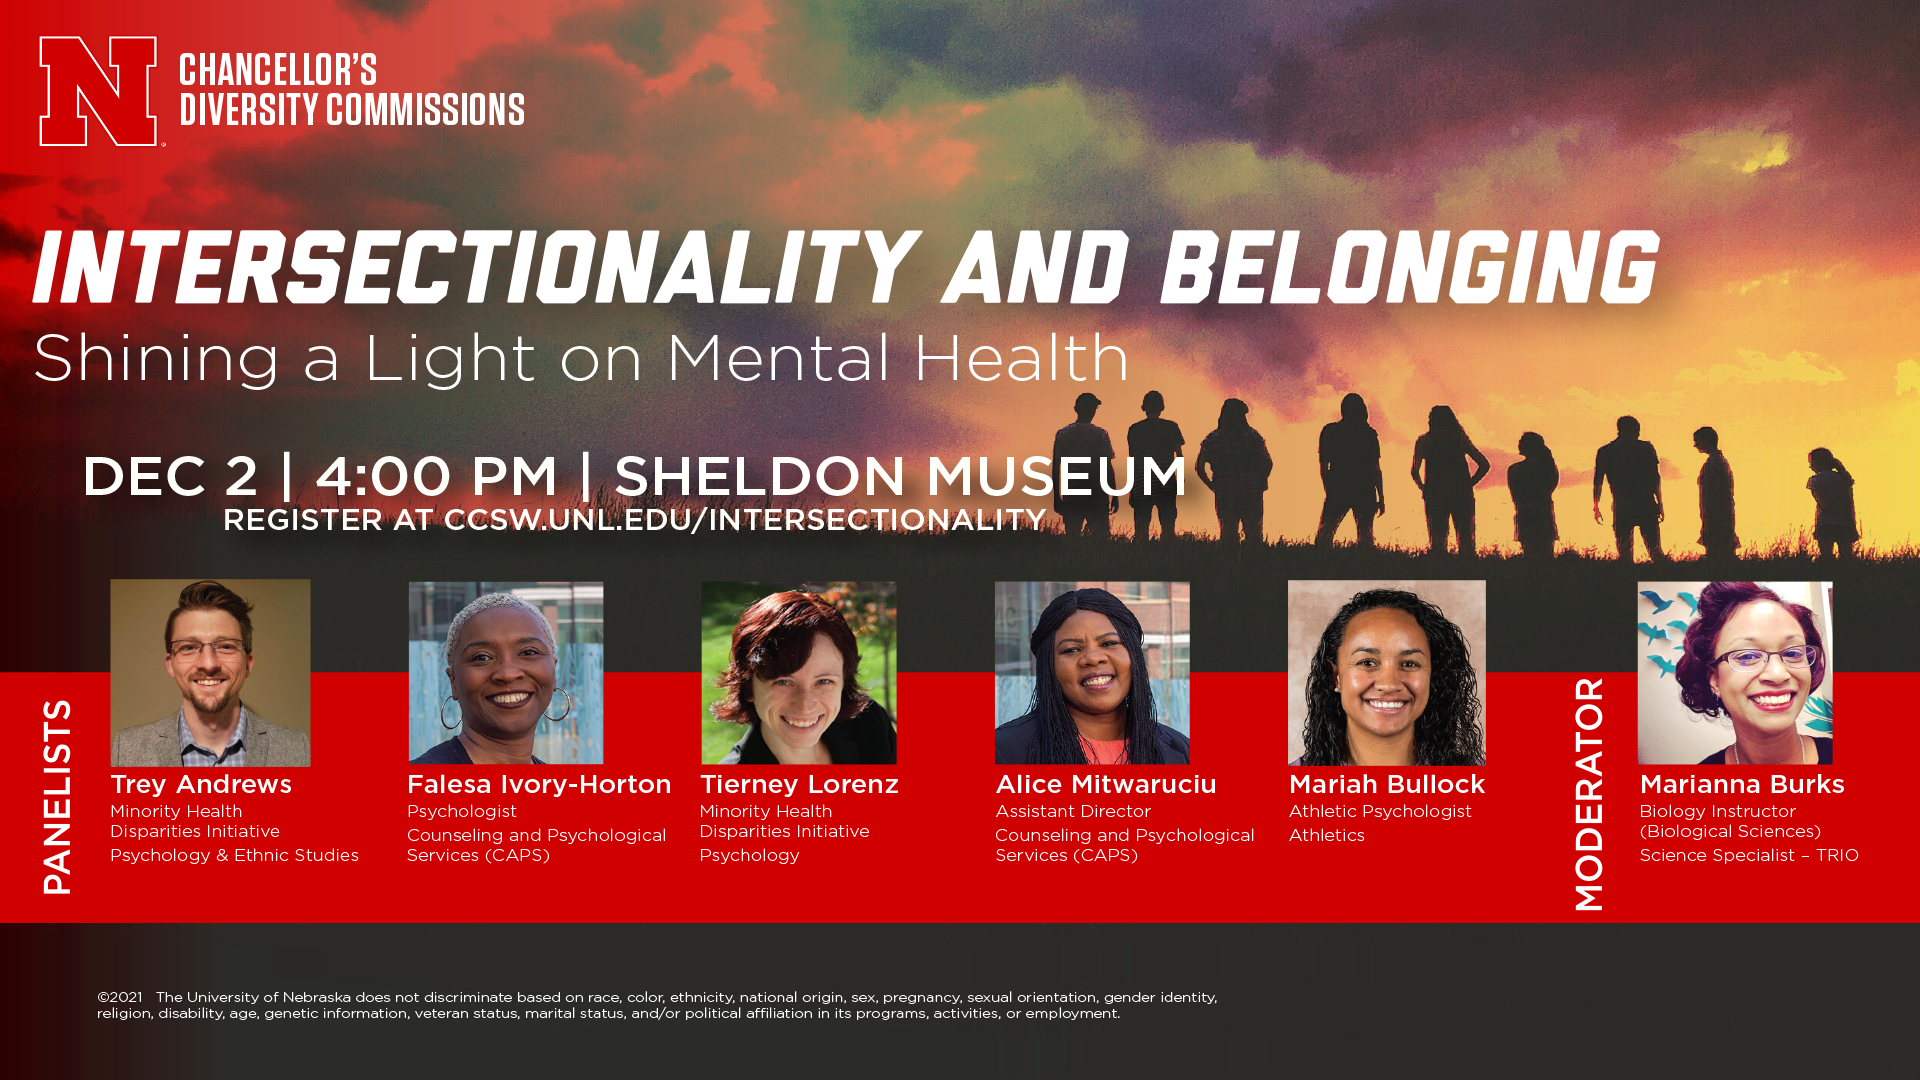 Chancellor’s Diversity Commissions to host discussion on “Intersectionality and Belonging: Shining a Light on Mental Health” on Thursday, December 2 at 4:00 p.m. at Sheldon Museum of Art. Register at https://ccsw.unl.edu/intersectionality-panel-registrati